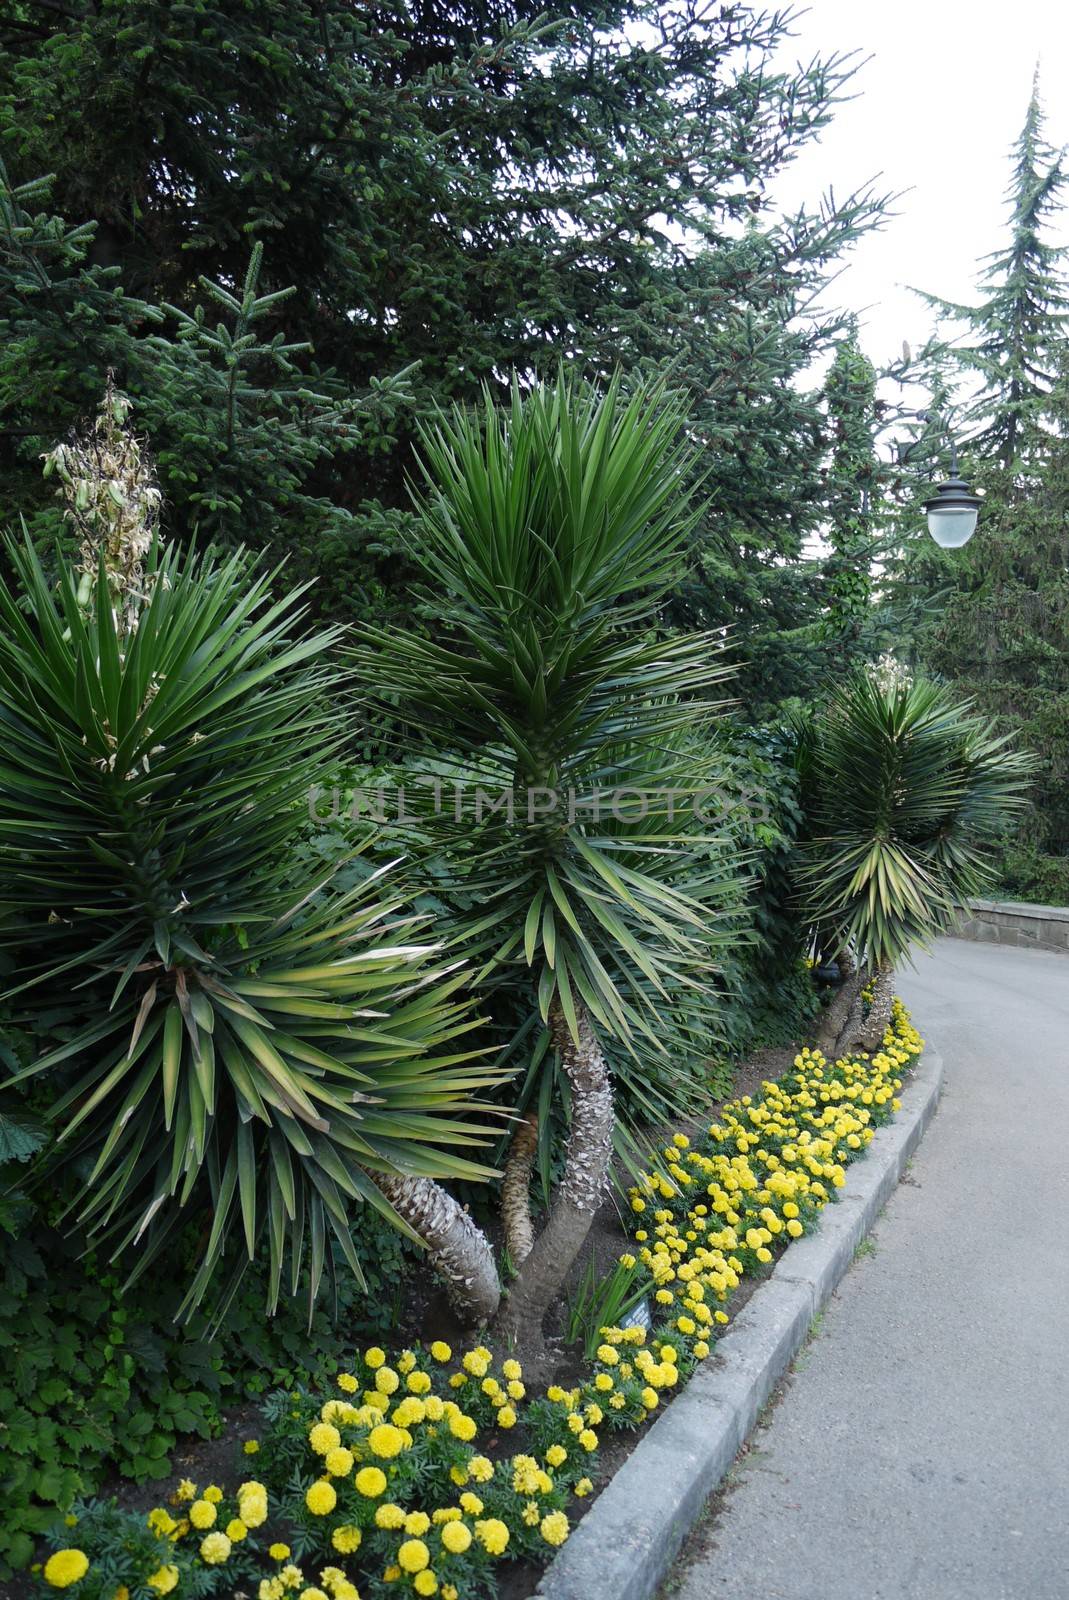 A flower bed with small yellow flowers and large green yuccas near a walking park lane